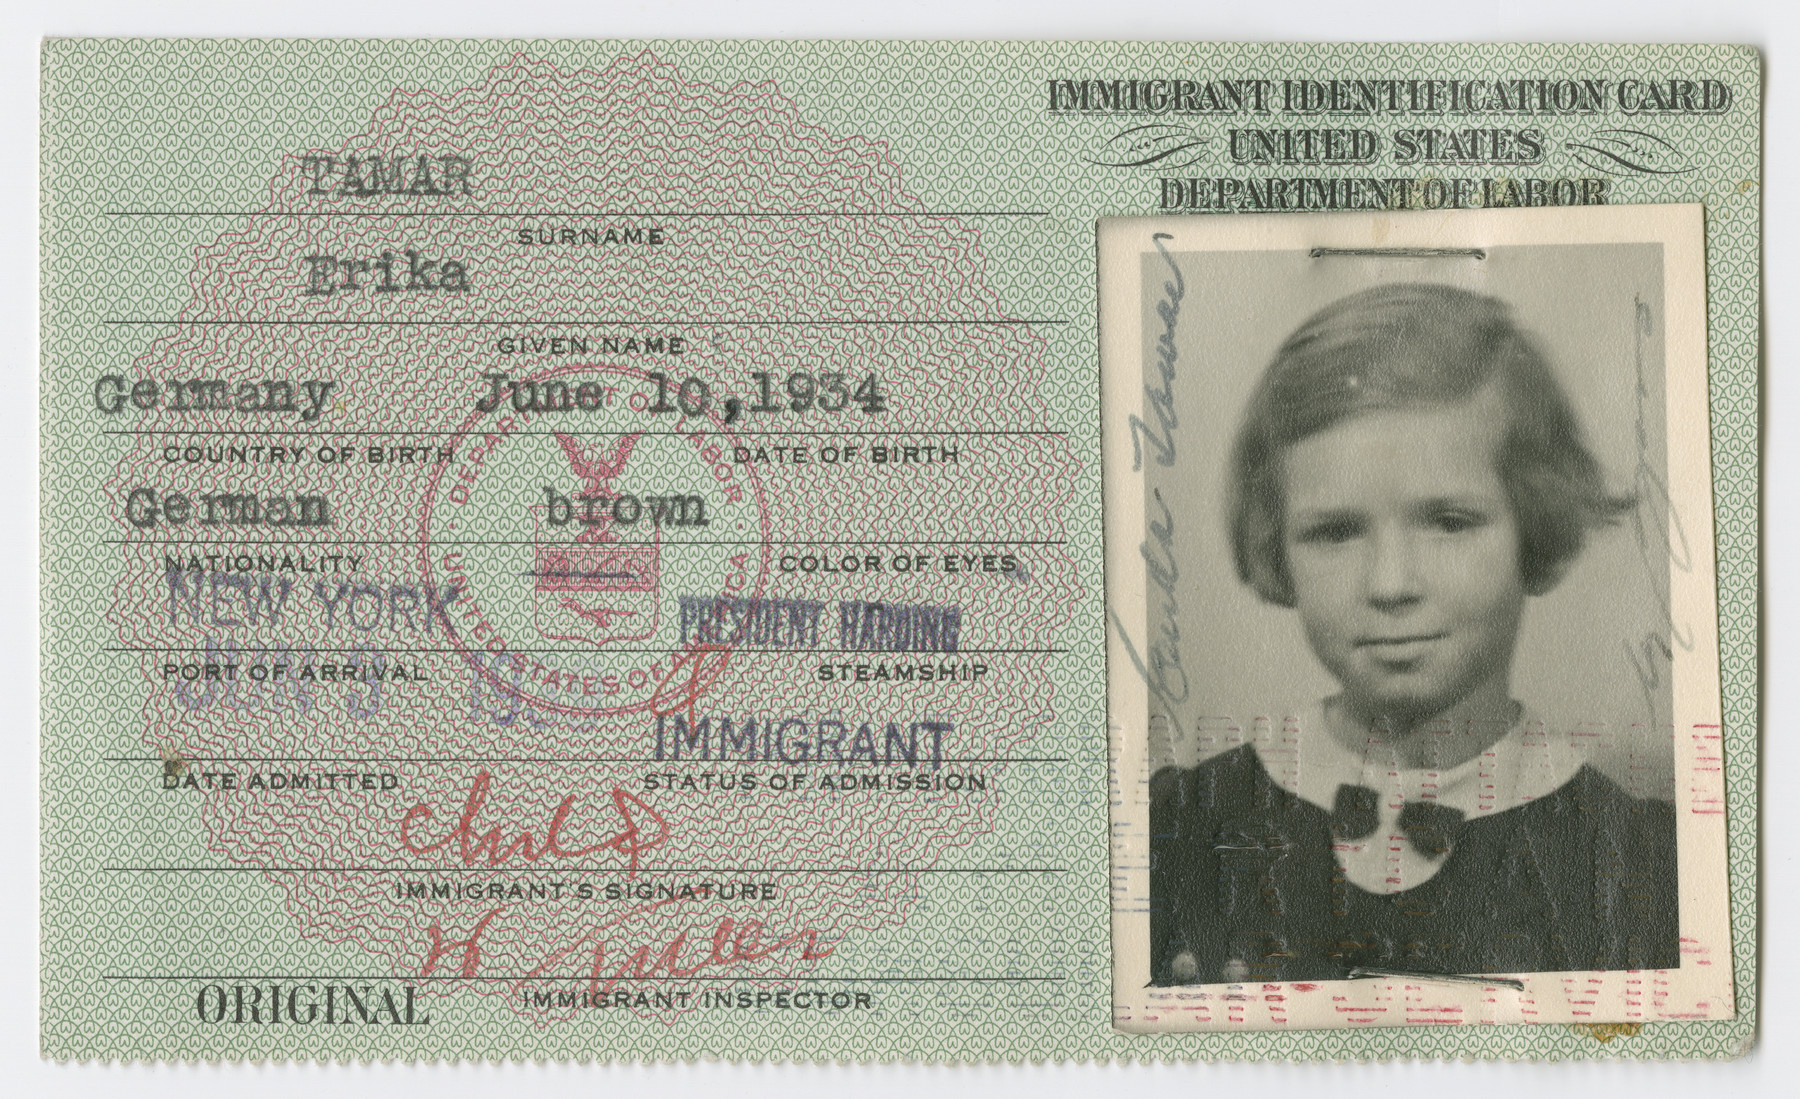 United States Immigrant Identification Card issued to Erika Tamar.

It states she was born in Germany though she was born in Vienna.